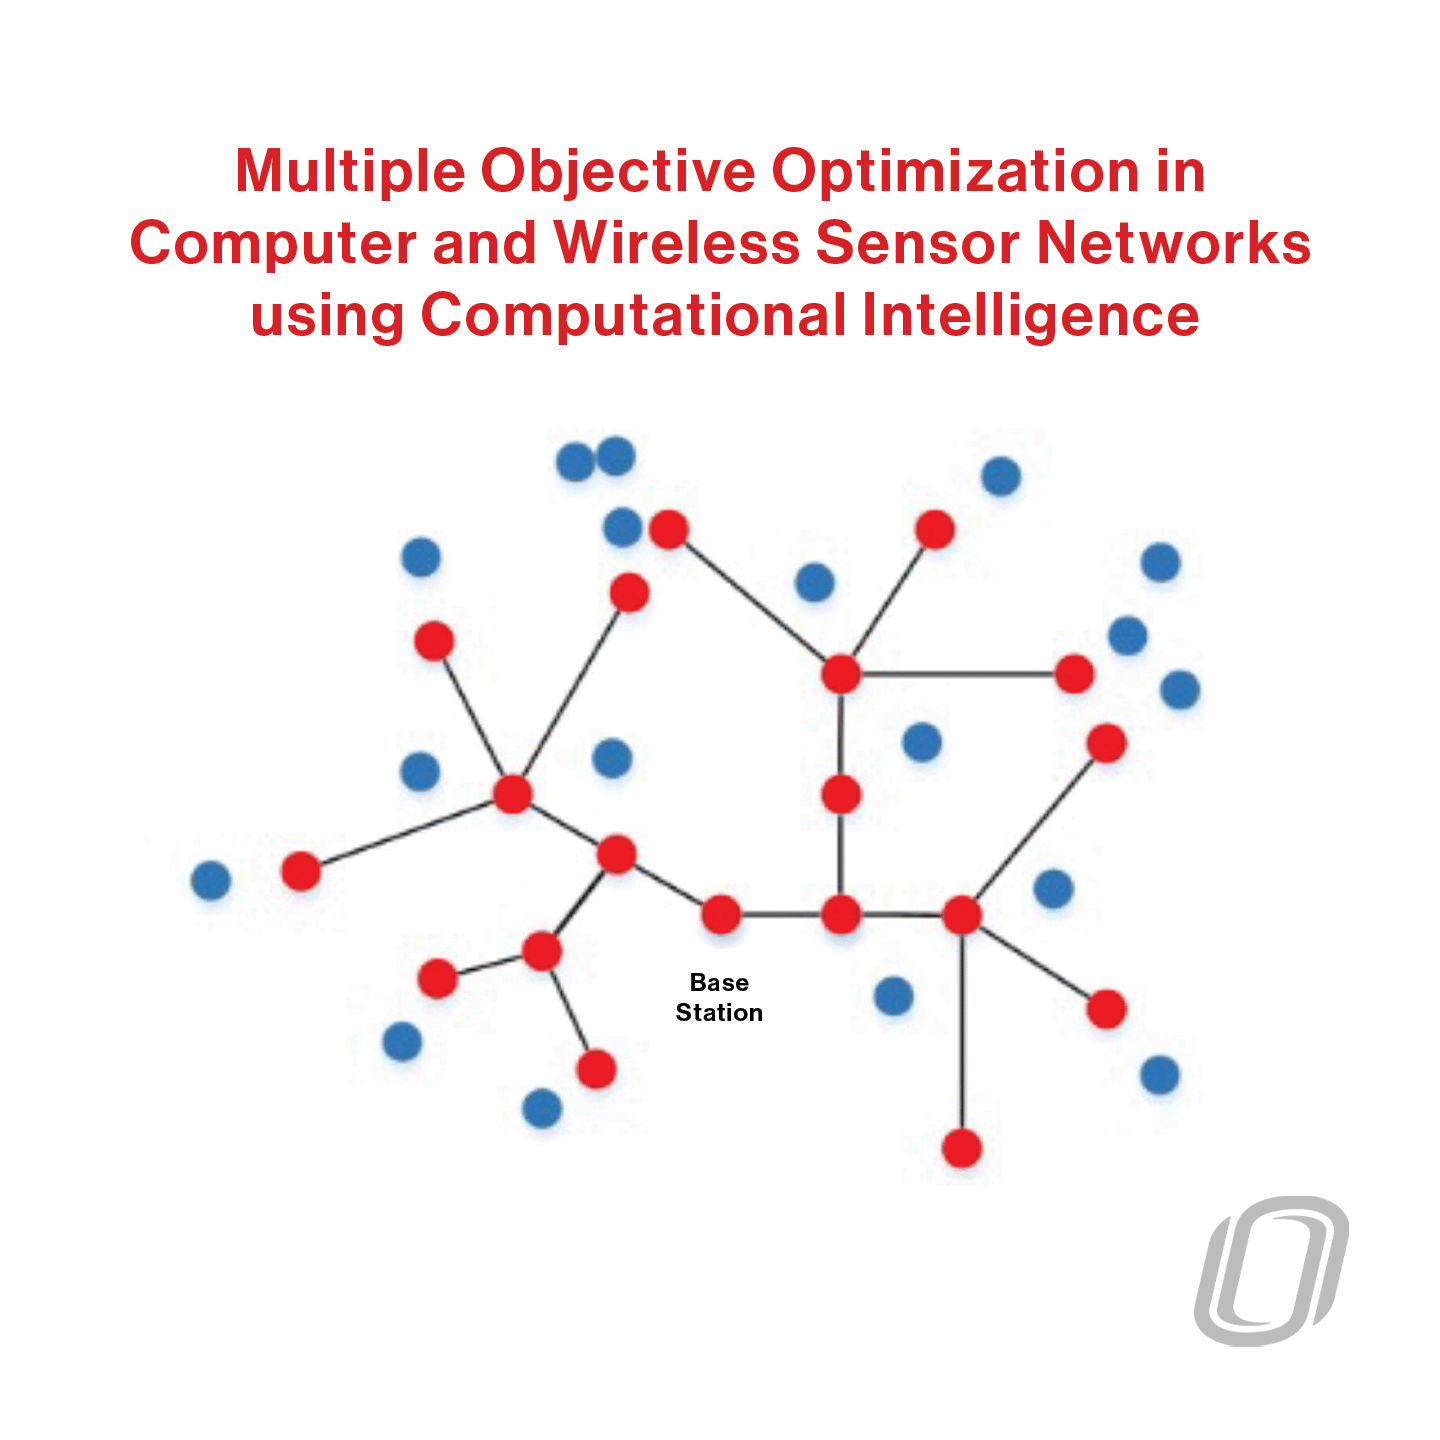 a diagram with several red and blue nodes that show the interconnectedness of sensor networks